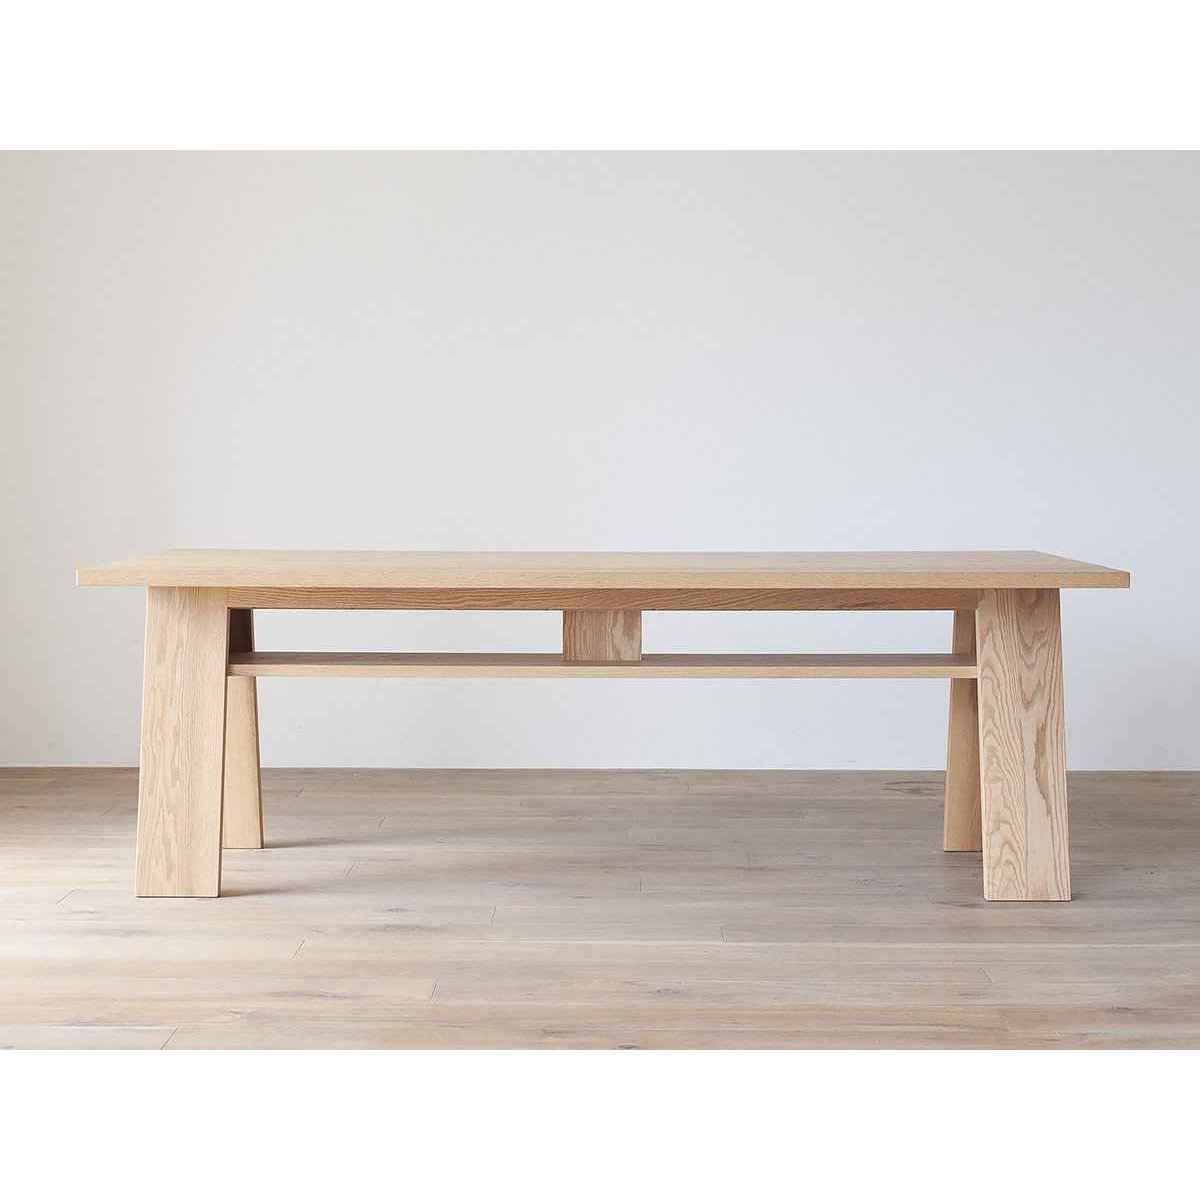 Sulit – Dining Table